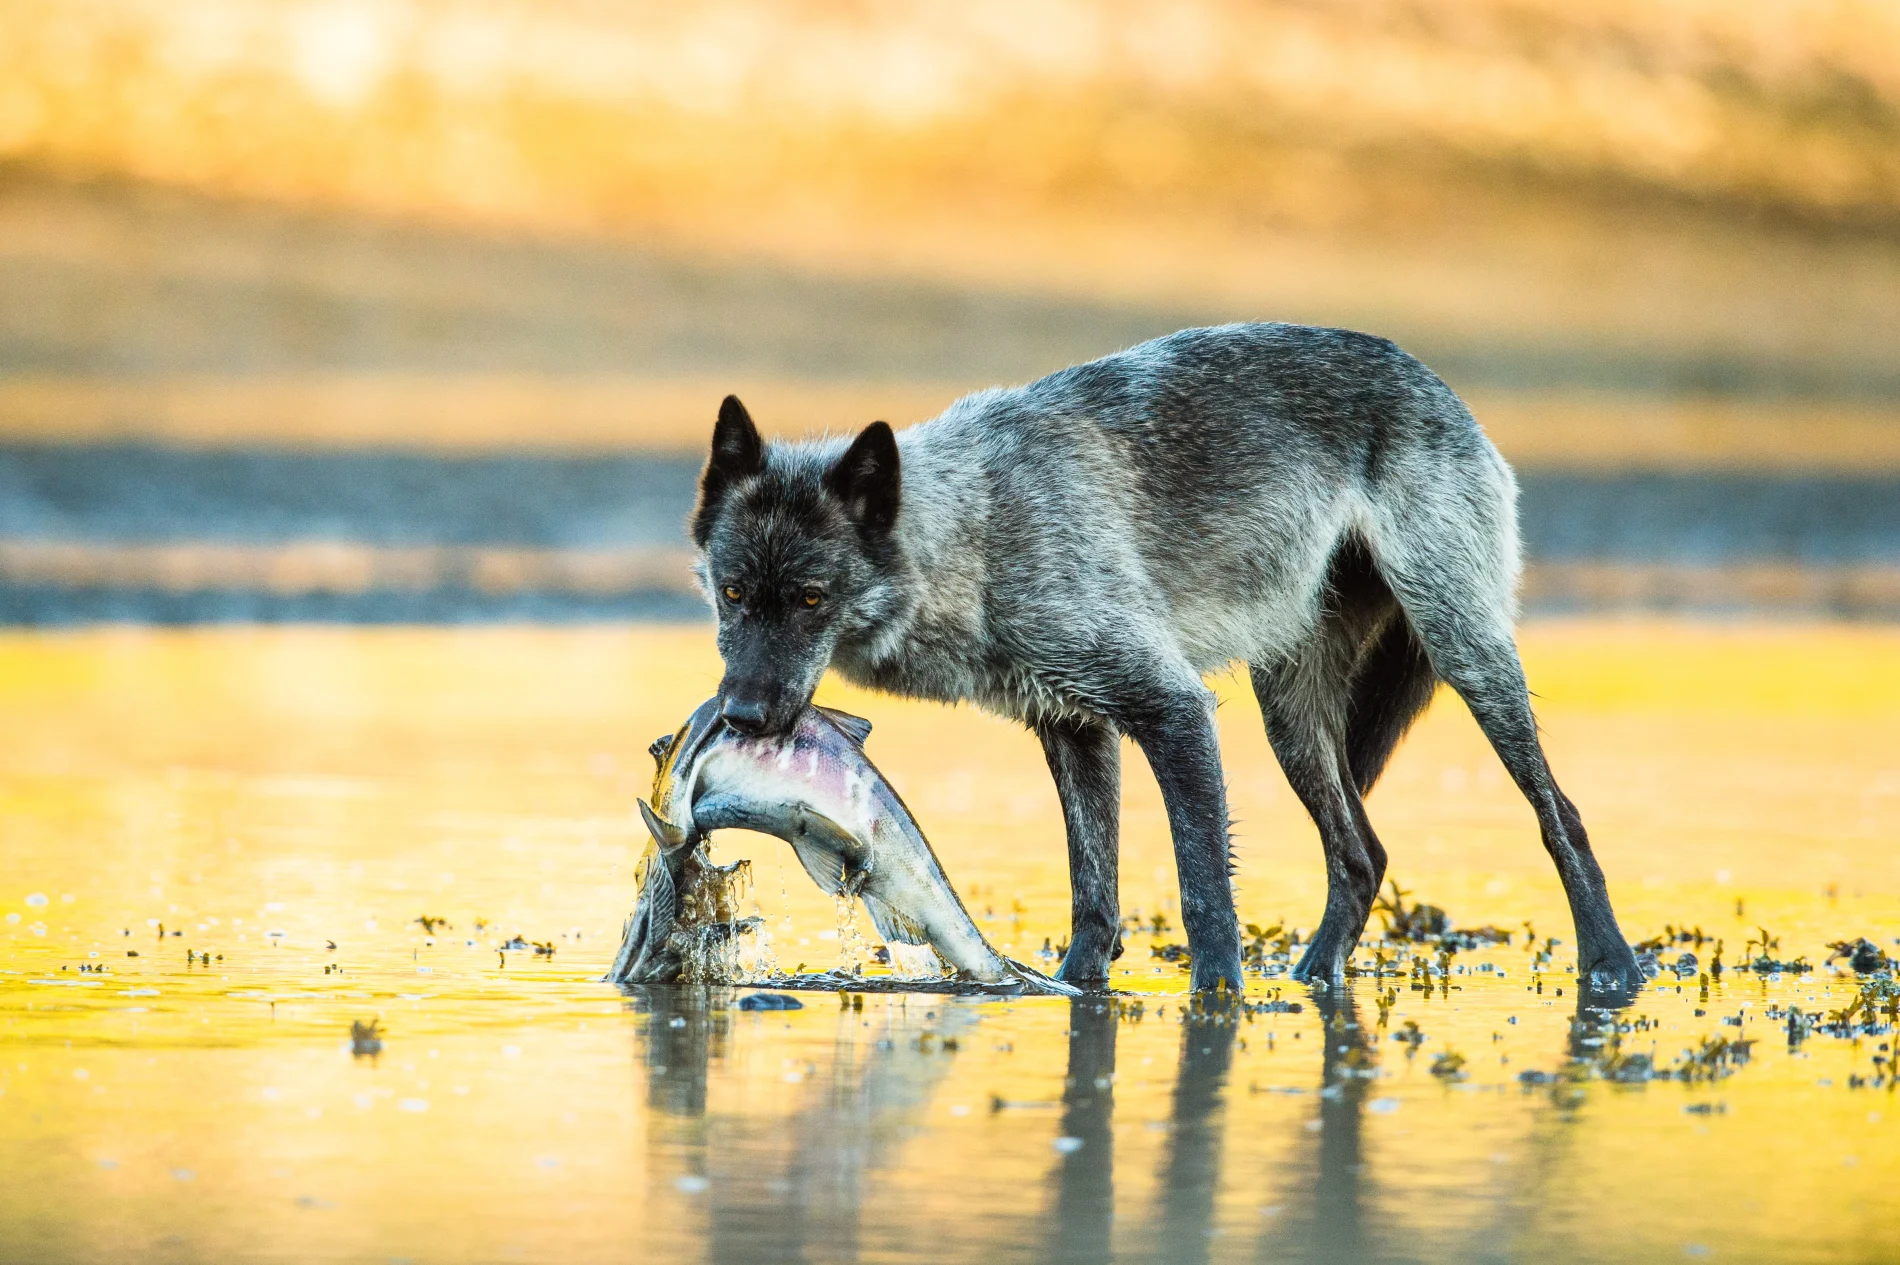 Wolf standing in water holding a fish in its mouth.